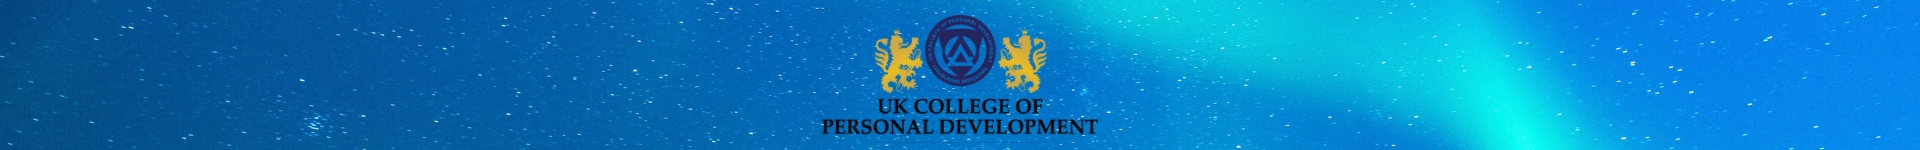 UK College of Personal Developments background